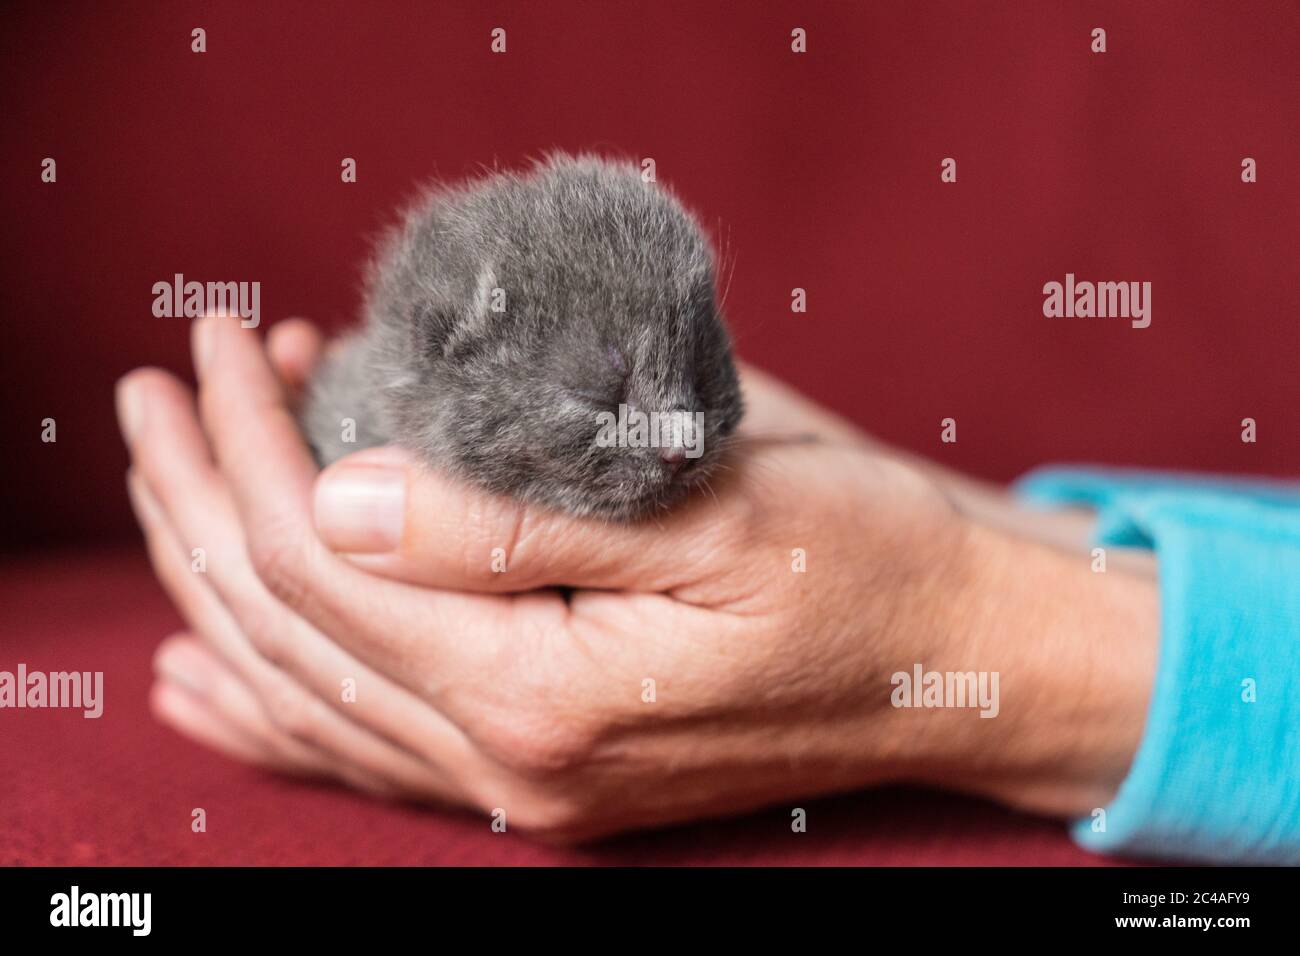 British Shorthair kitten, one or two weeks old, being held in hand with a red back ground Stock Photo